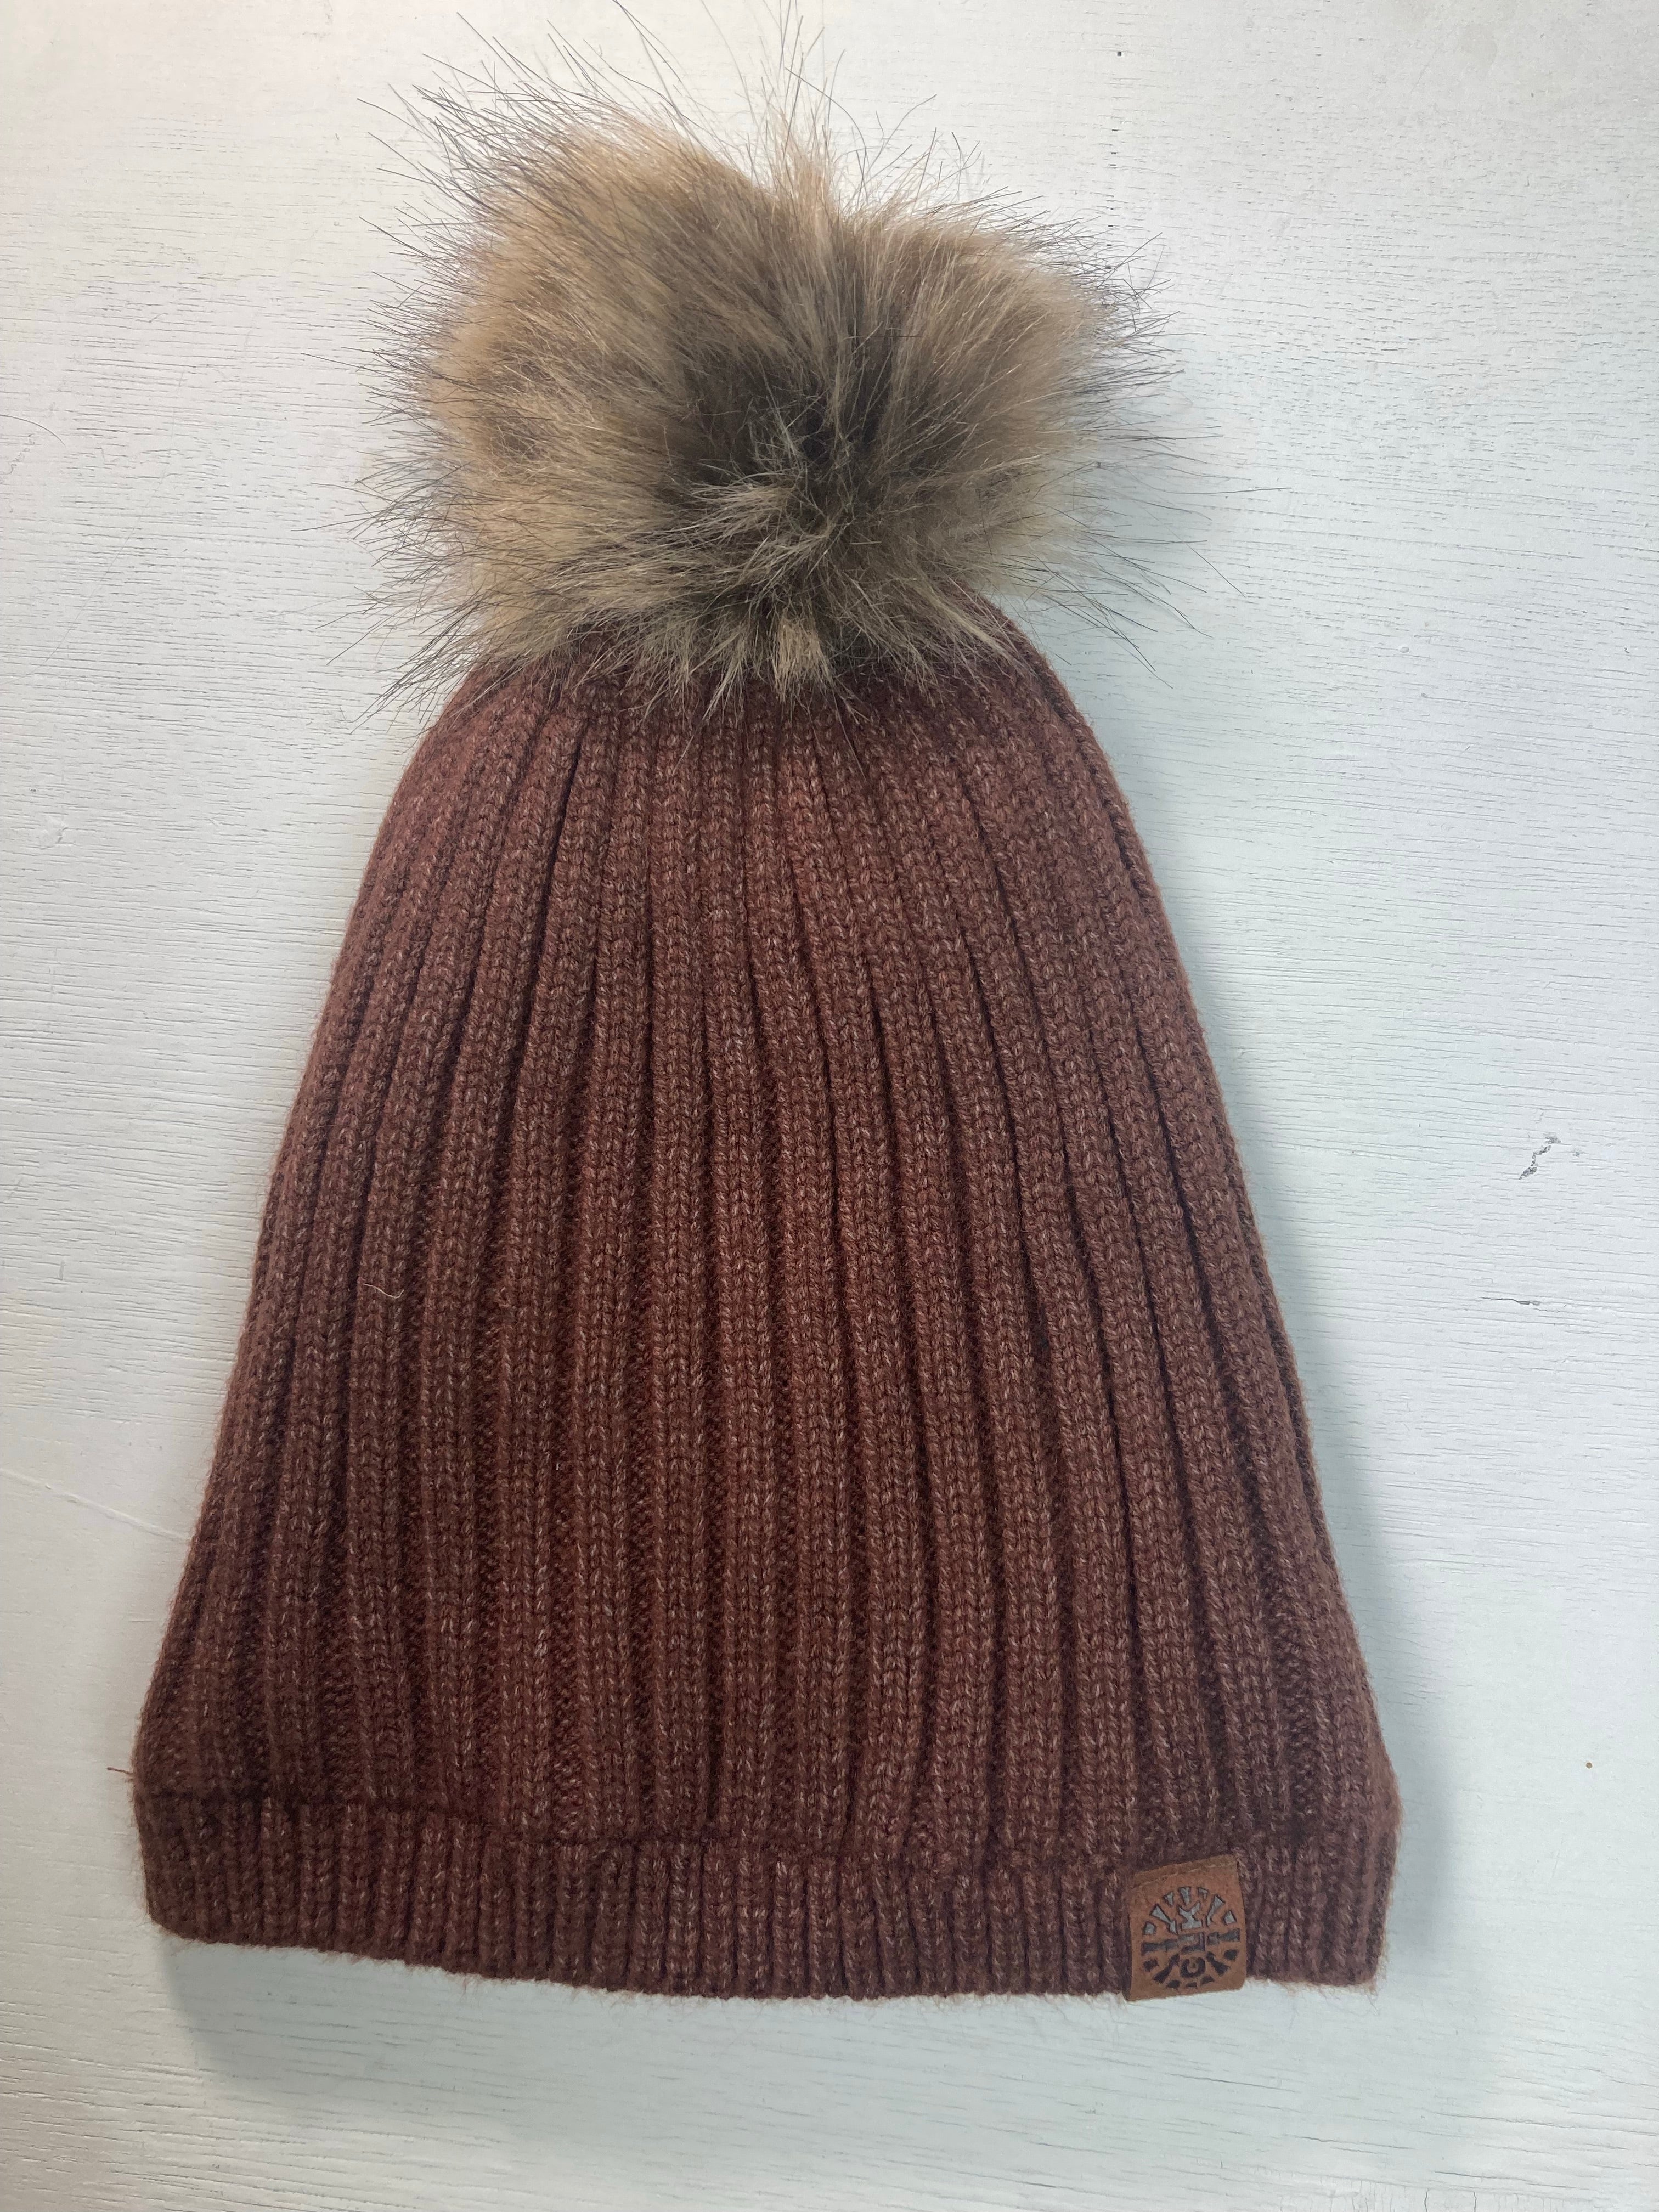 Lined Knit Hat with Pompom  Calikids